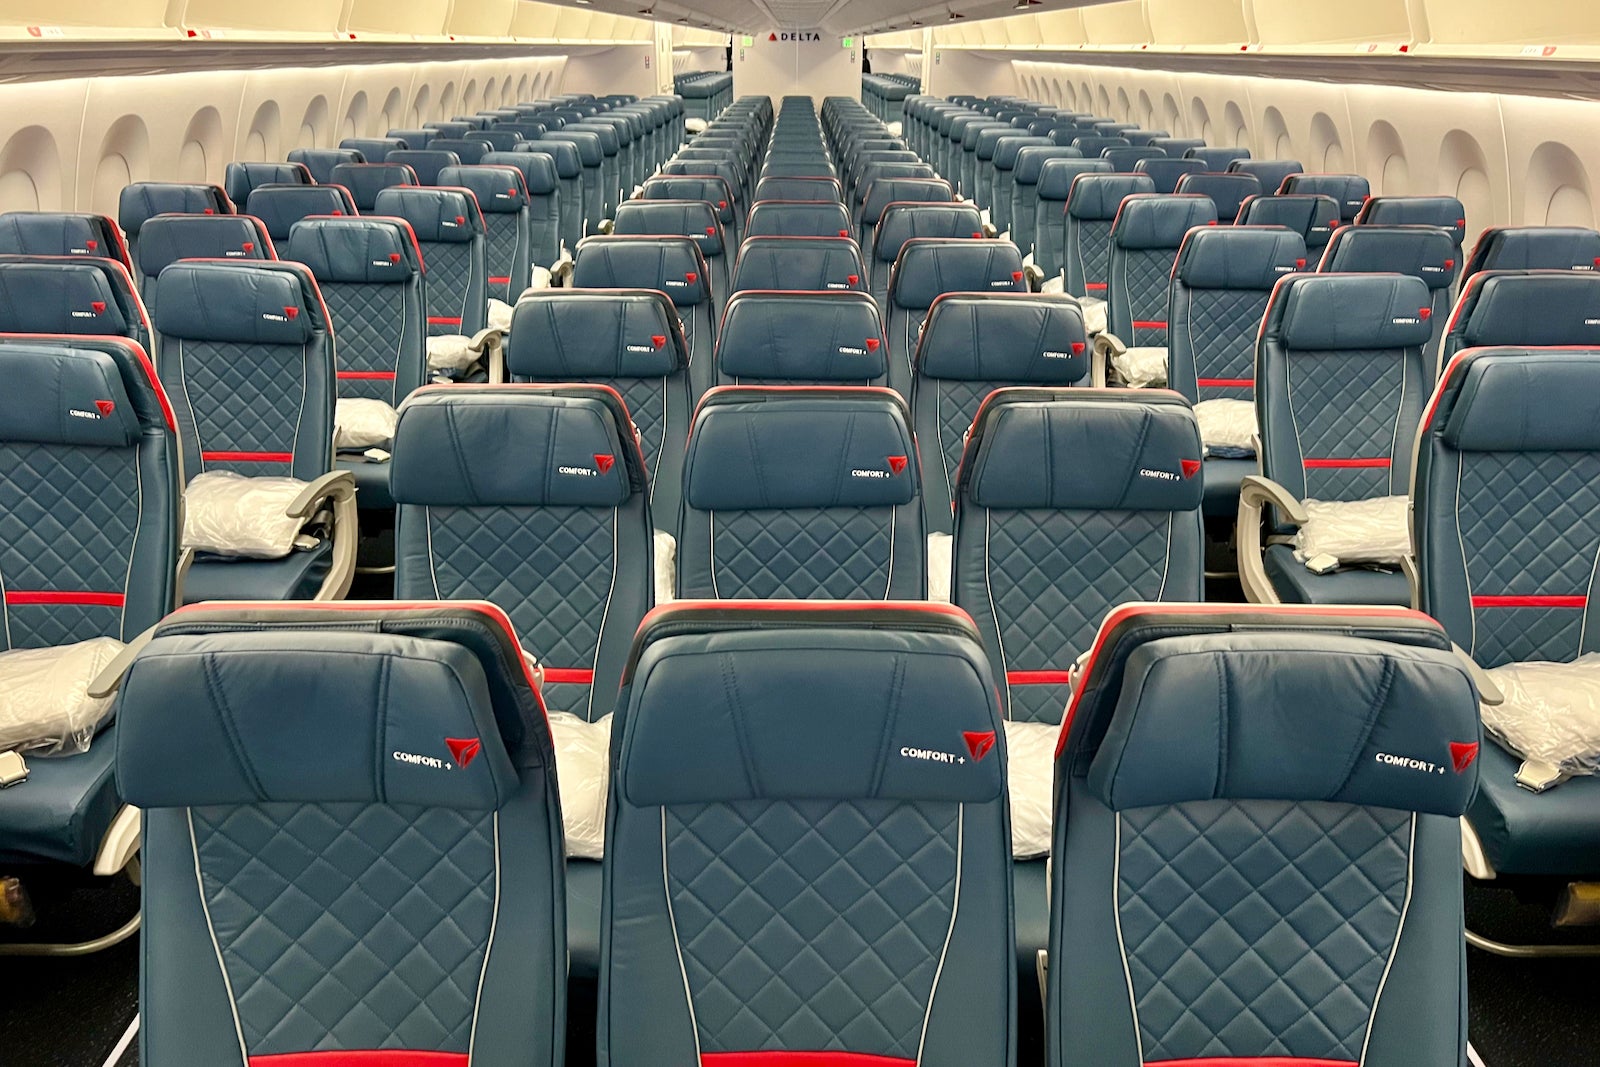 First look: Delta's Comfort+ and economy cabins on the 'new